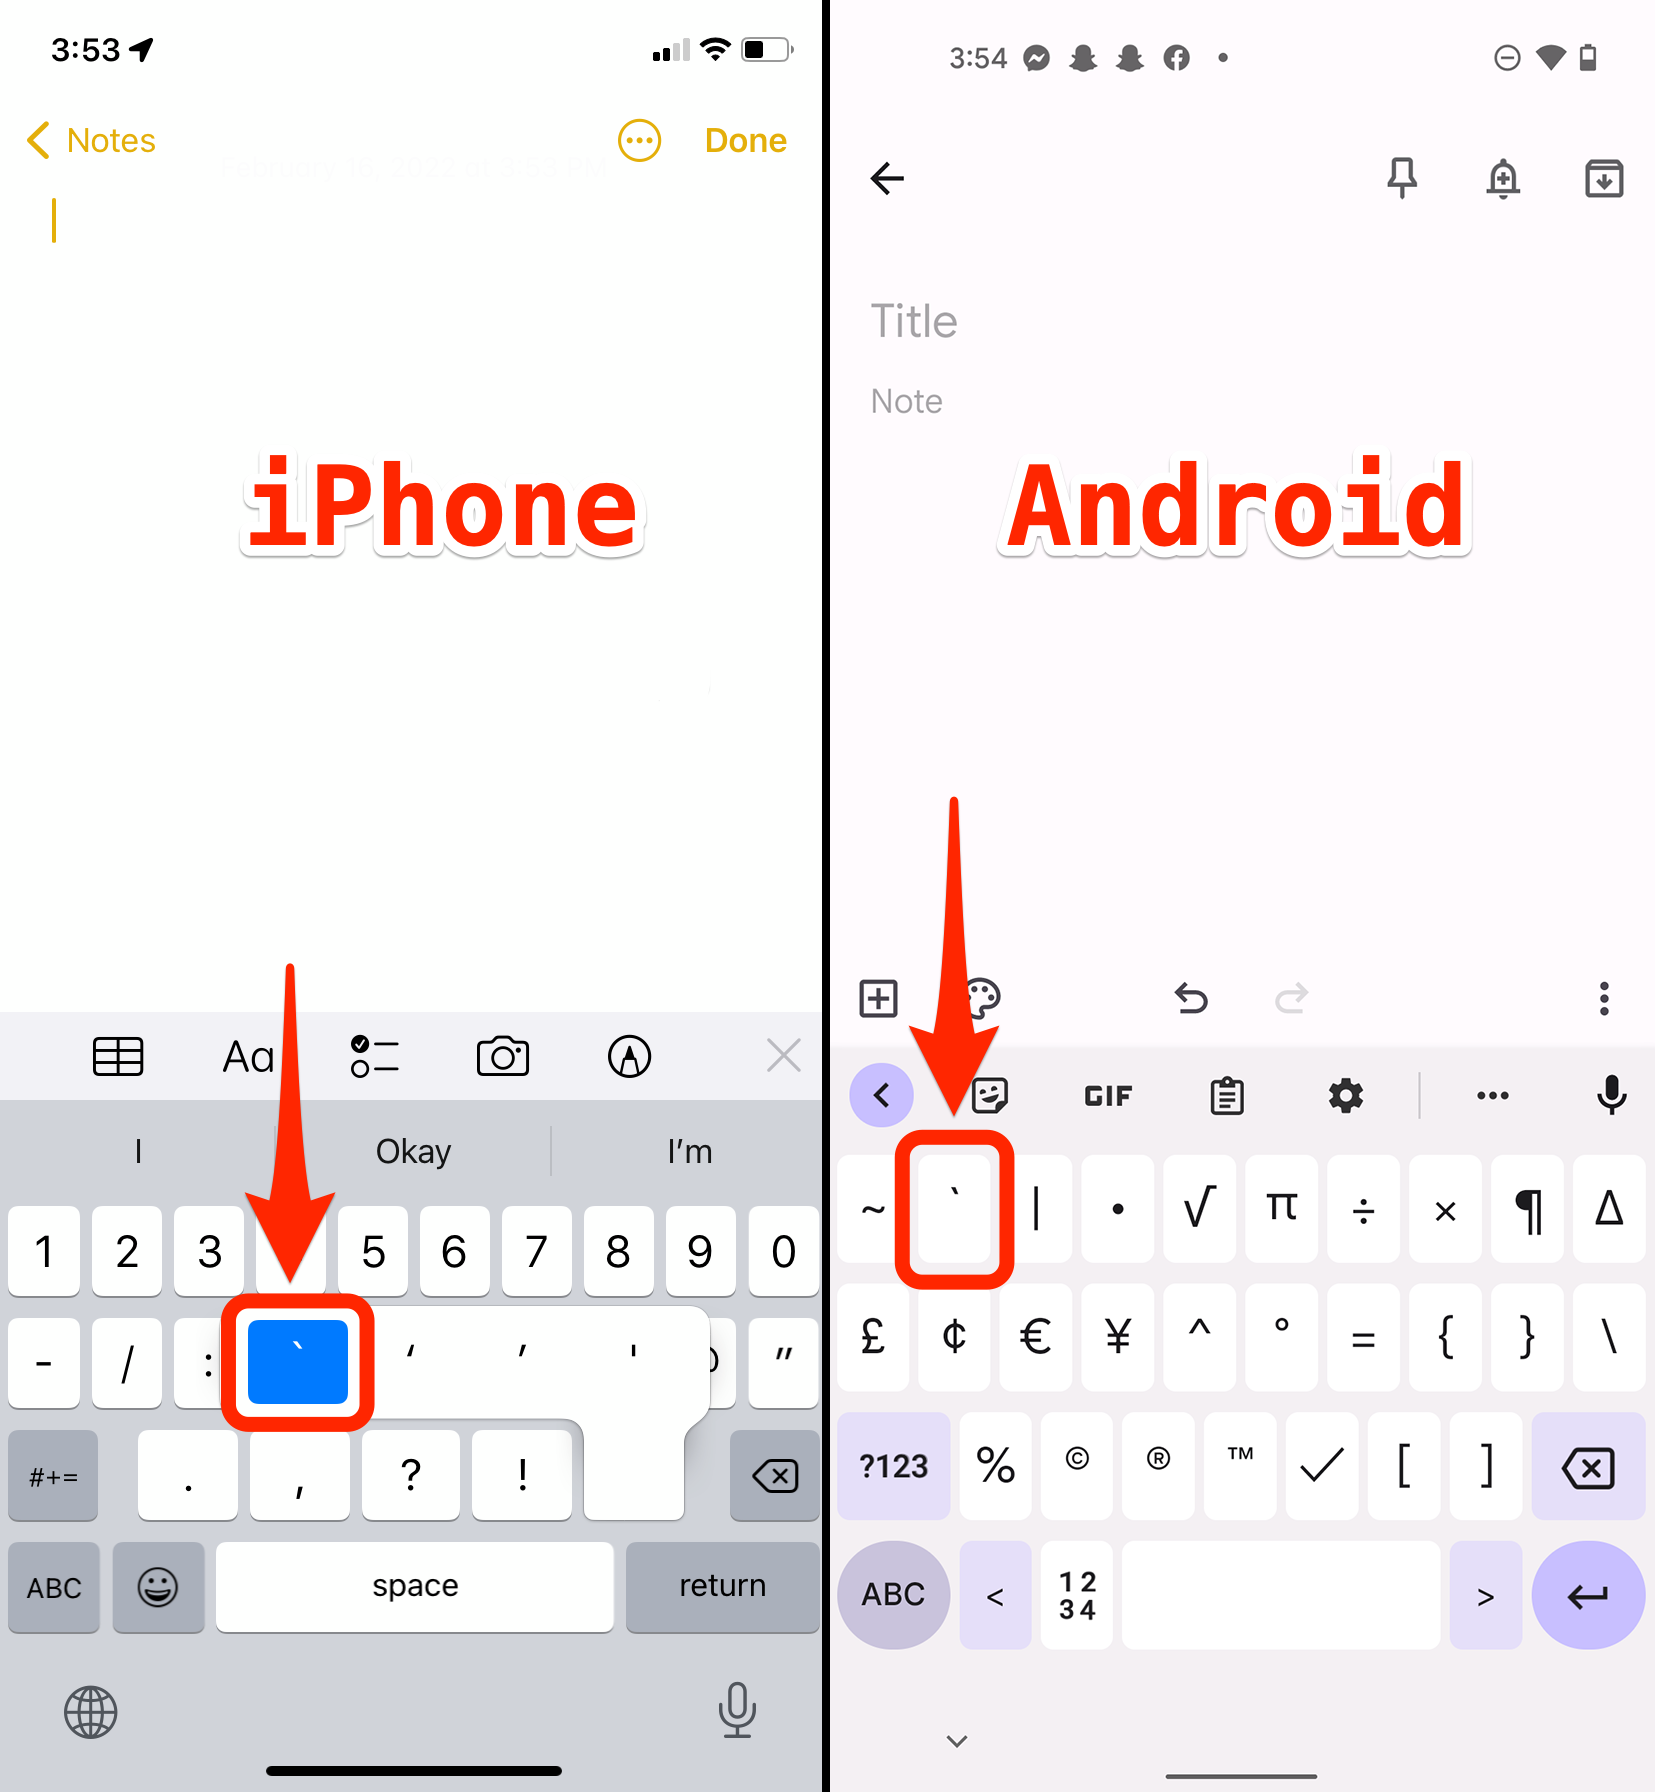 The backtick key on both an iPhone and Android keyboard.